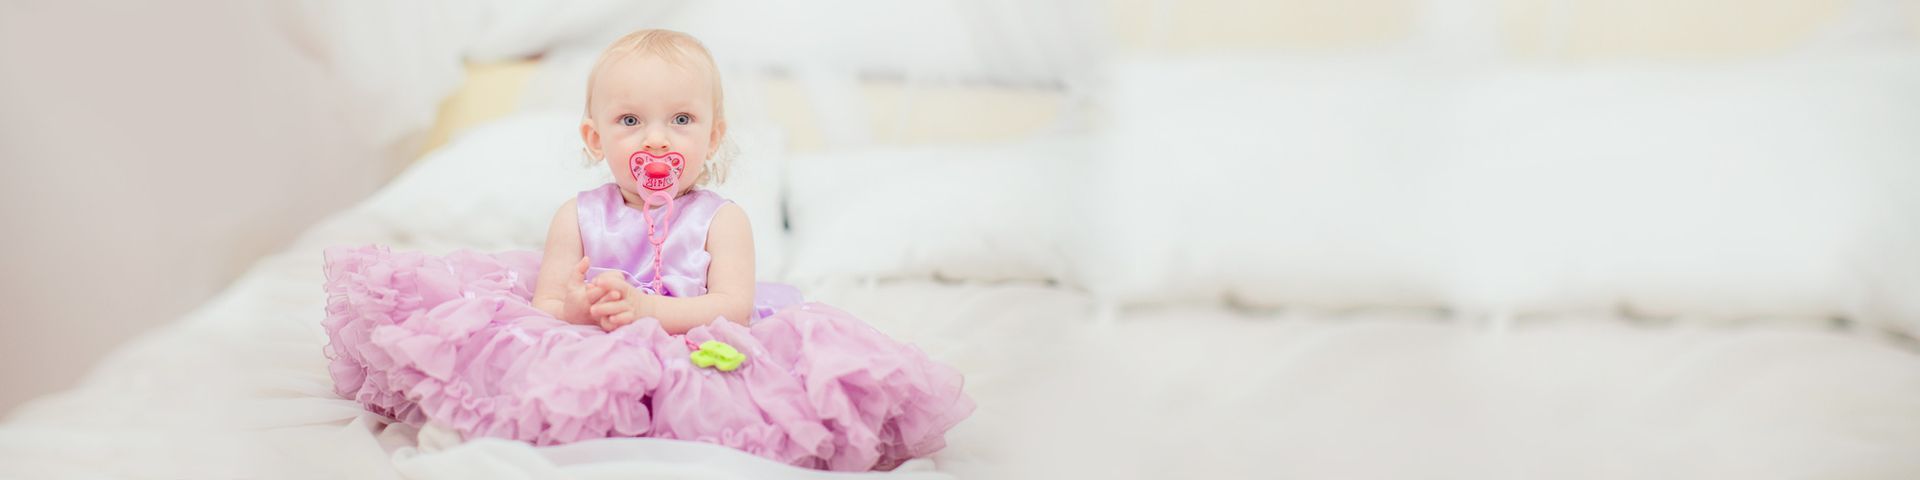 a baby in a purple dress with a pacifier in her mouth